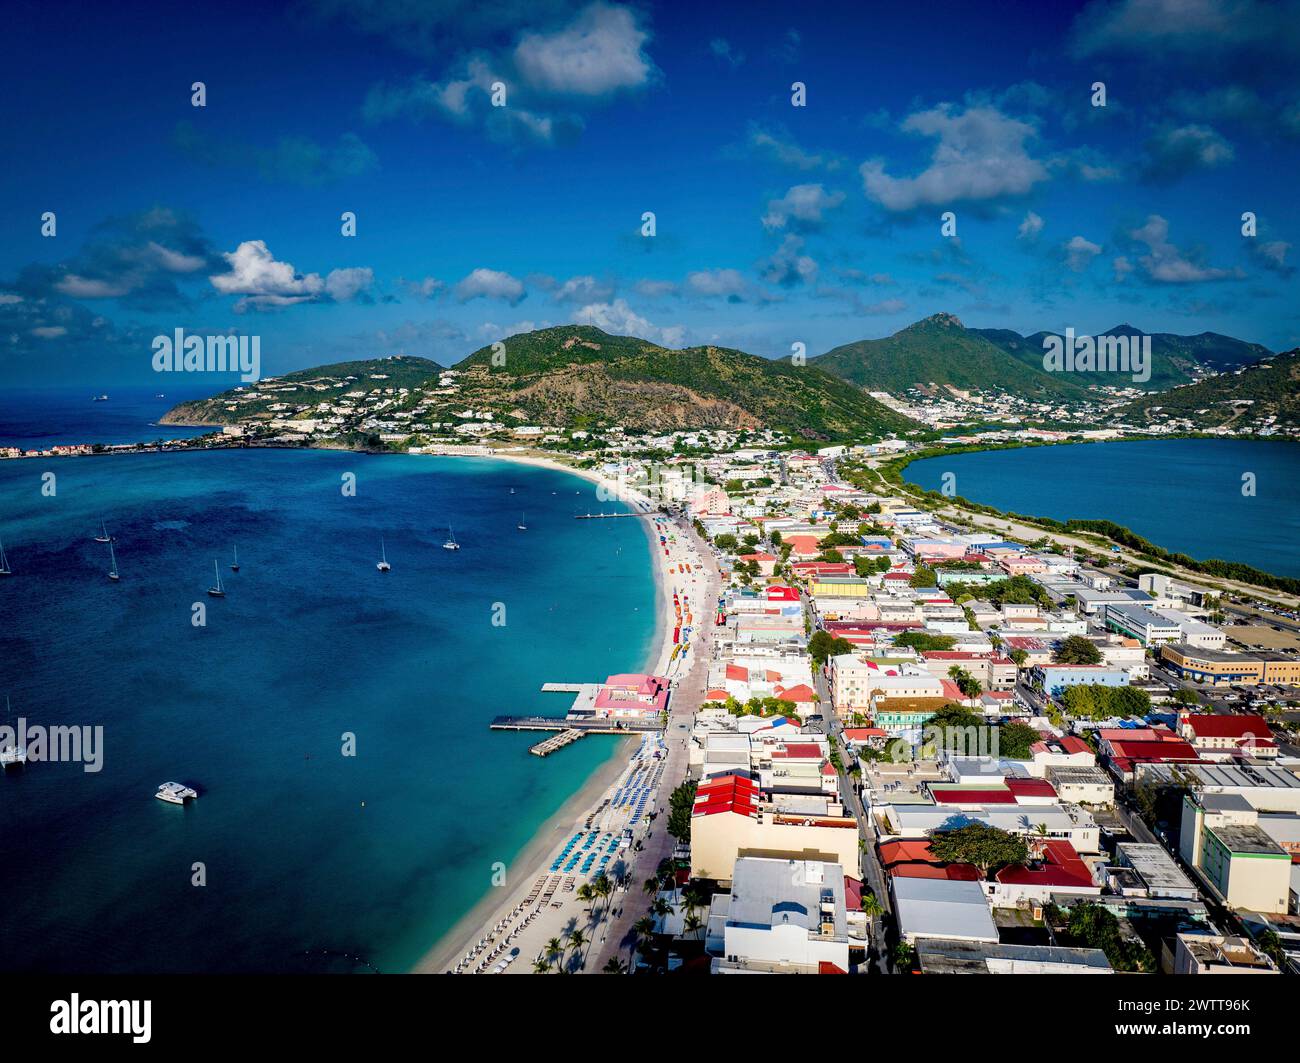 Aerial view of a vibrant coastal town with lush green hills and clear blue waters. Stock Photo